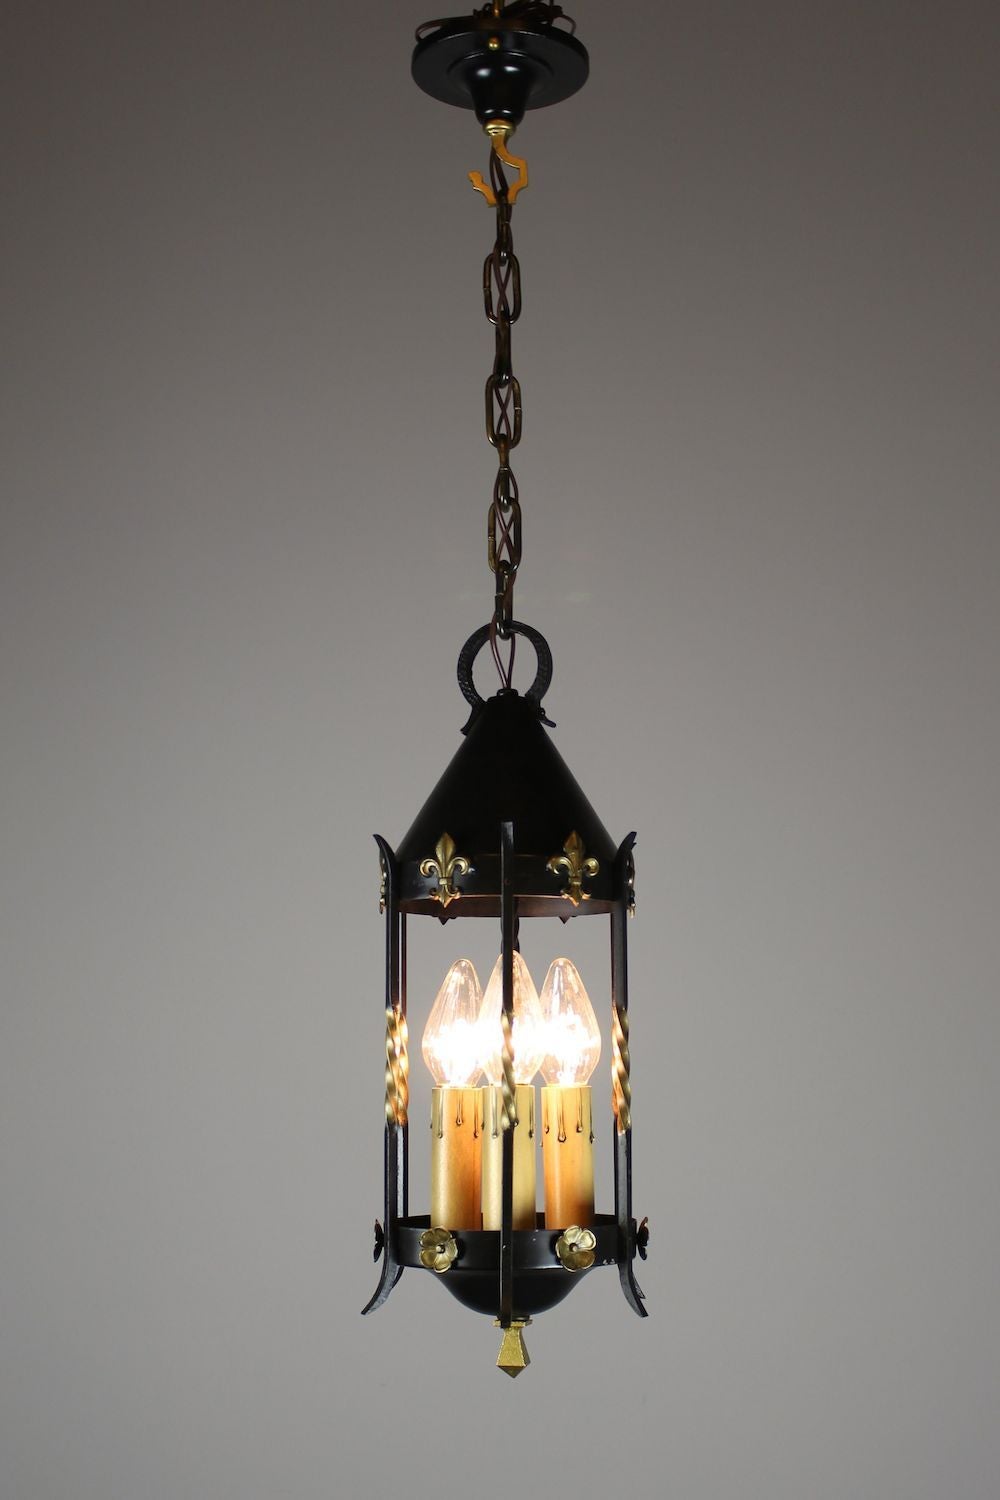 1930s Spanish Colonial Lantern by Moe Bridges Co. In Excellent Condition For Sale In Vancouver, BC